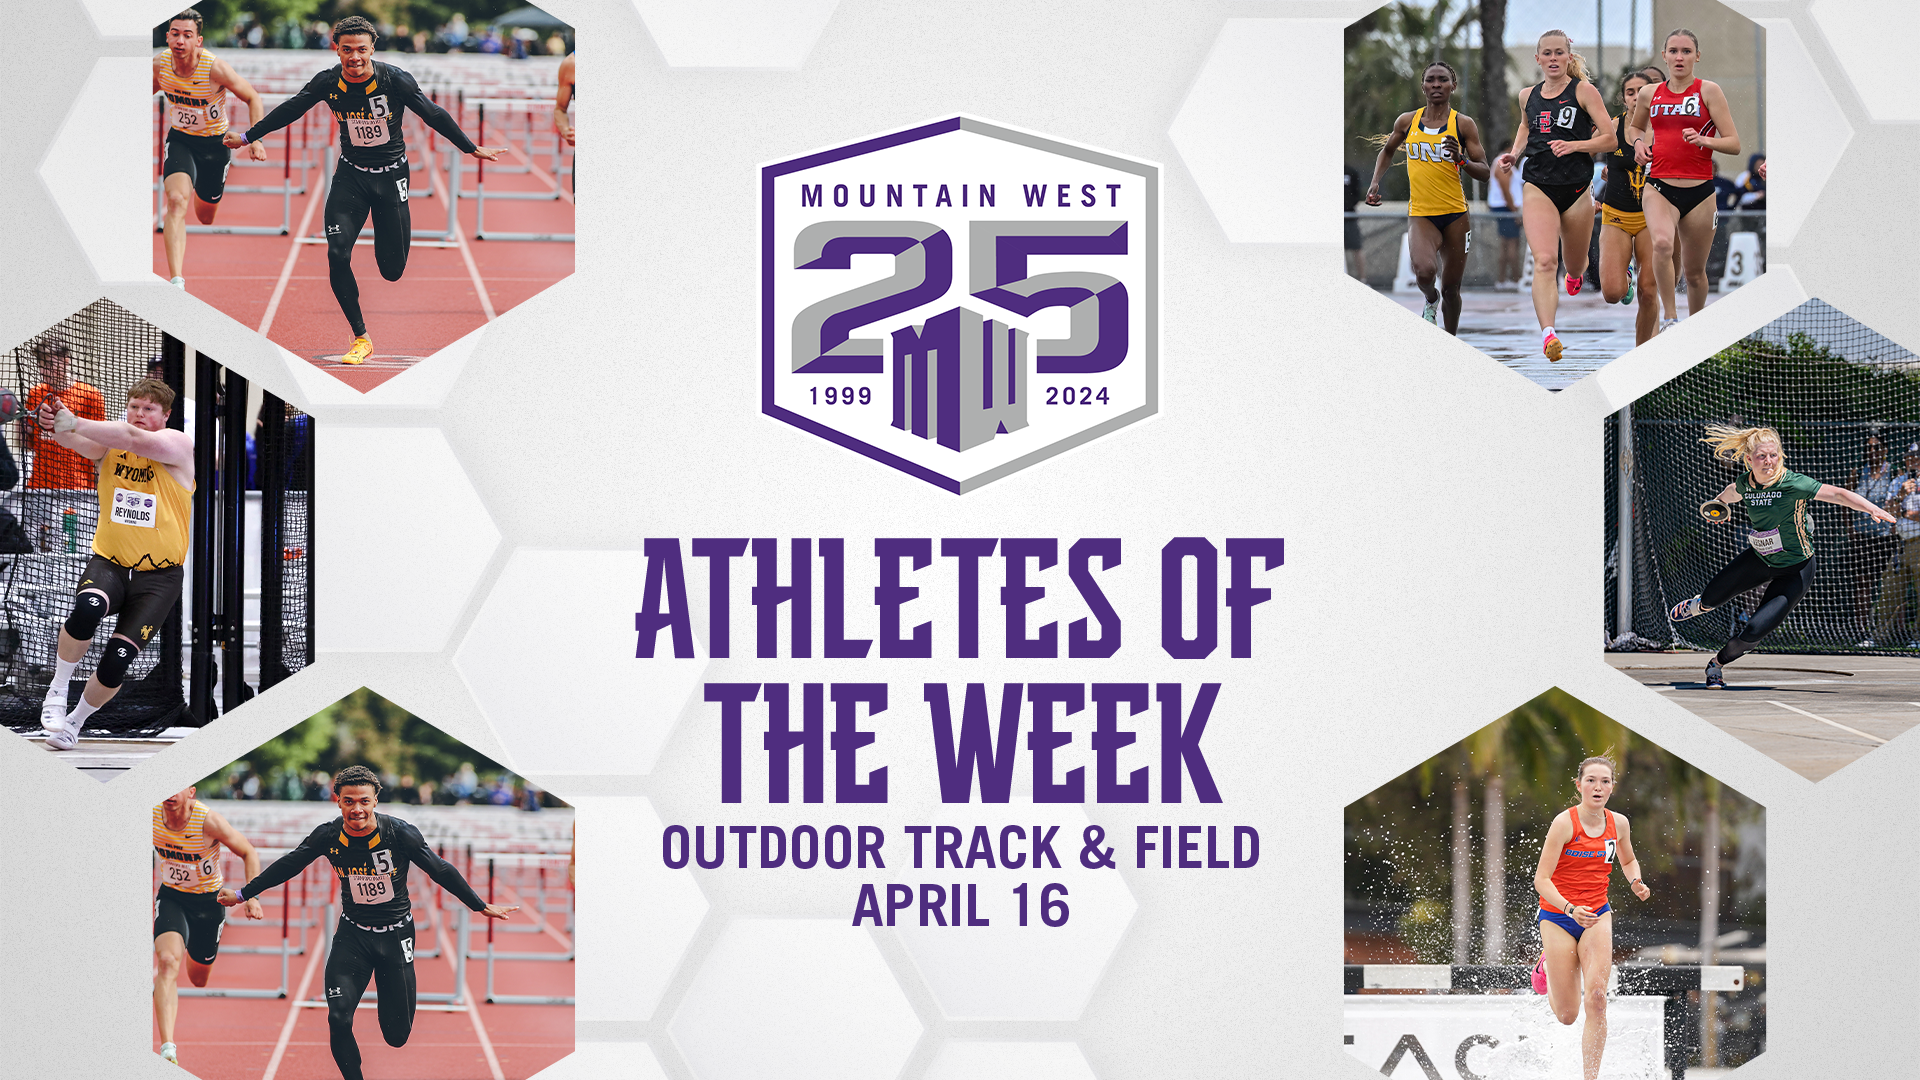 Mountain West Outdoor Track & Field Athletes of the Week - April 16